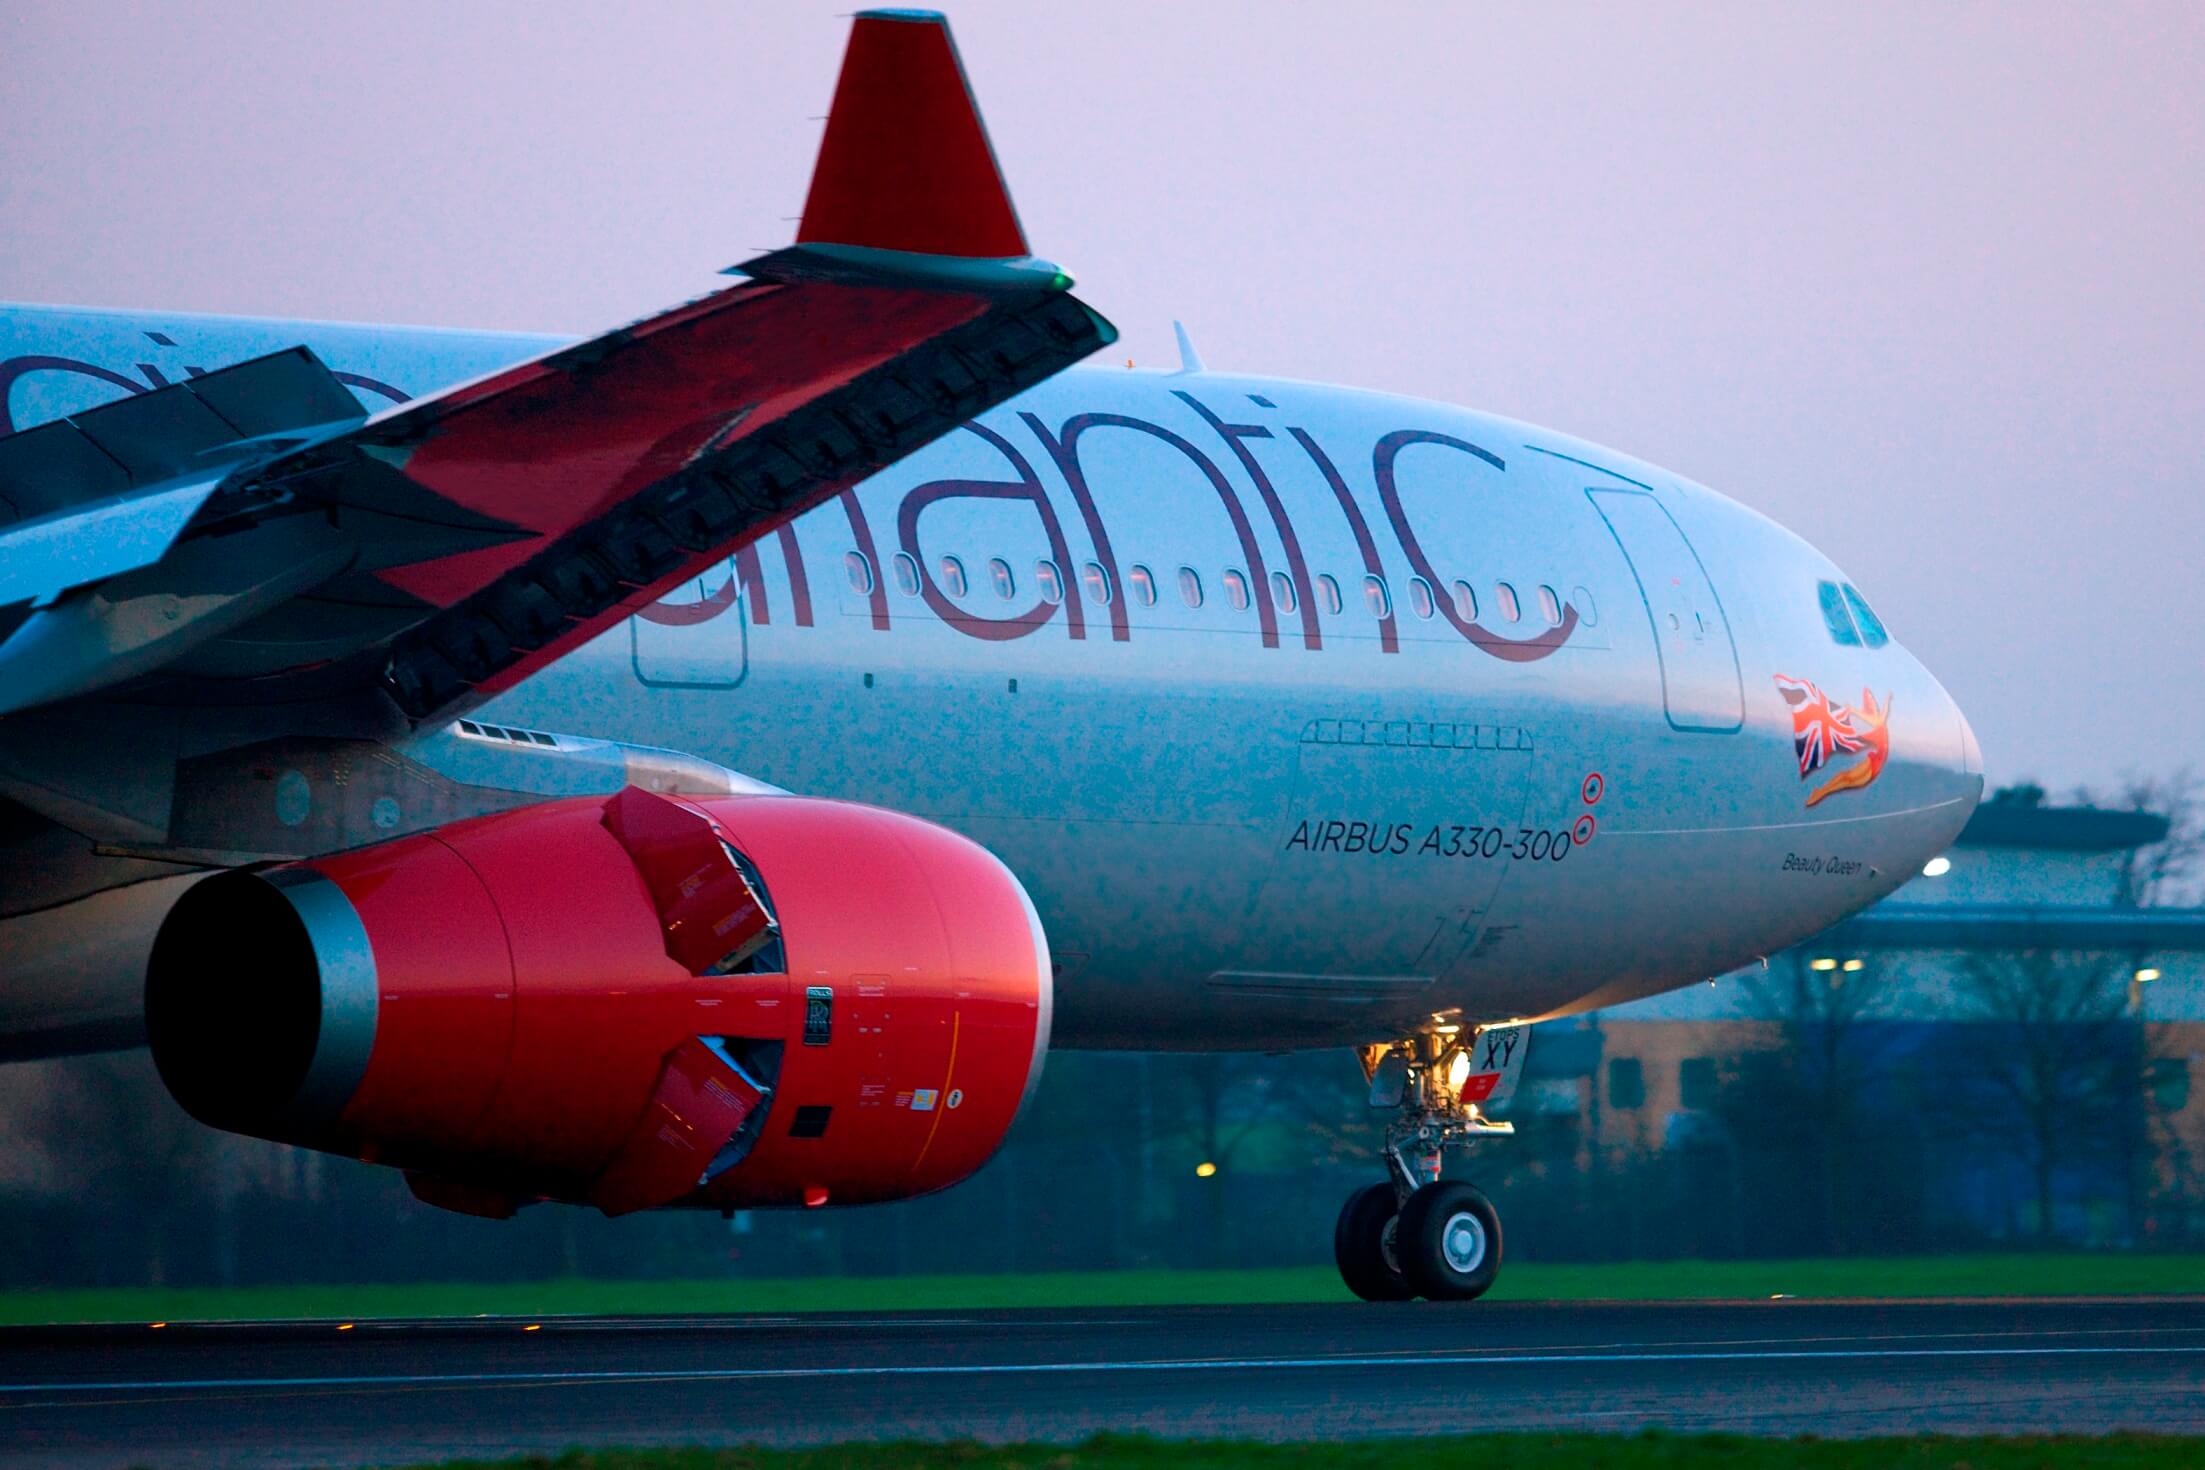 Virgin to resume flying from Heathrow to Shanghai